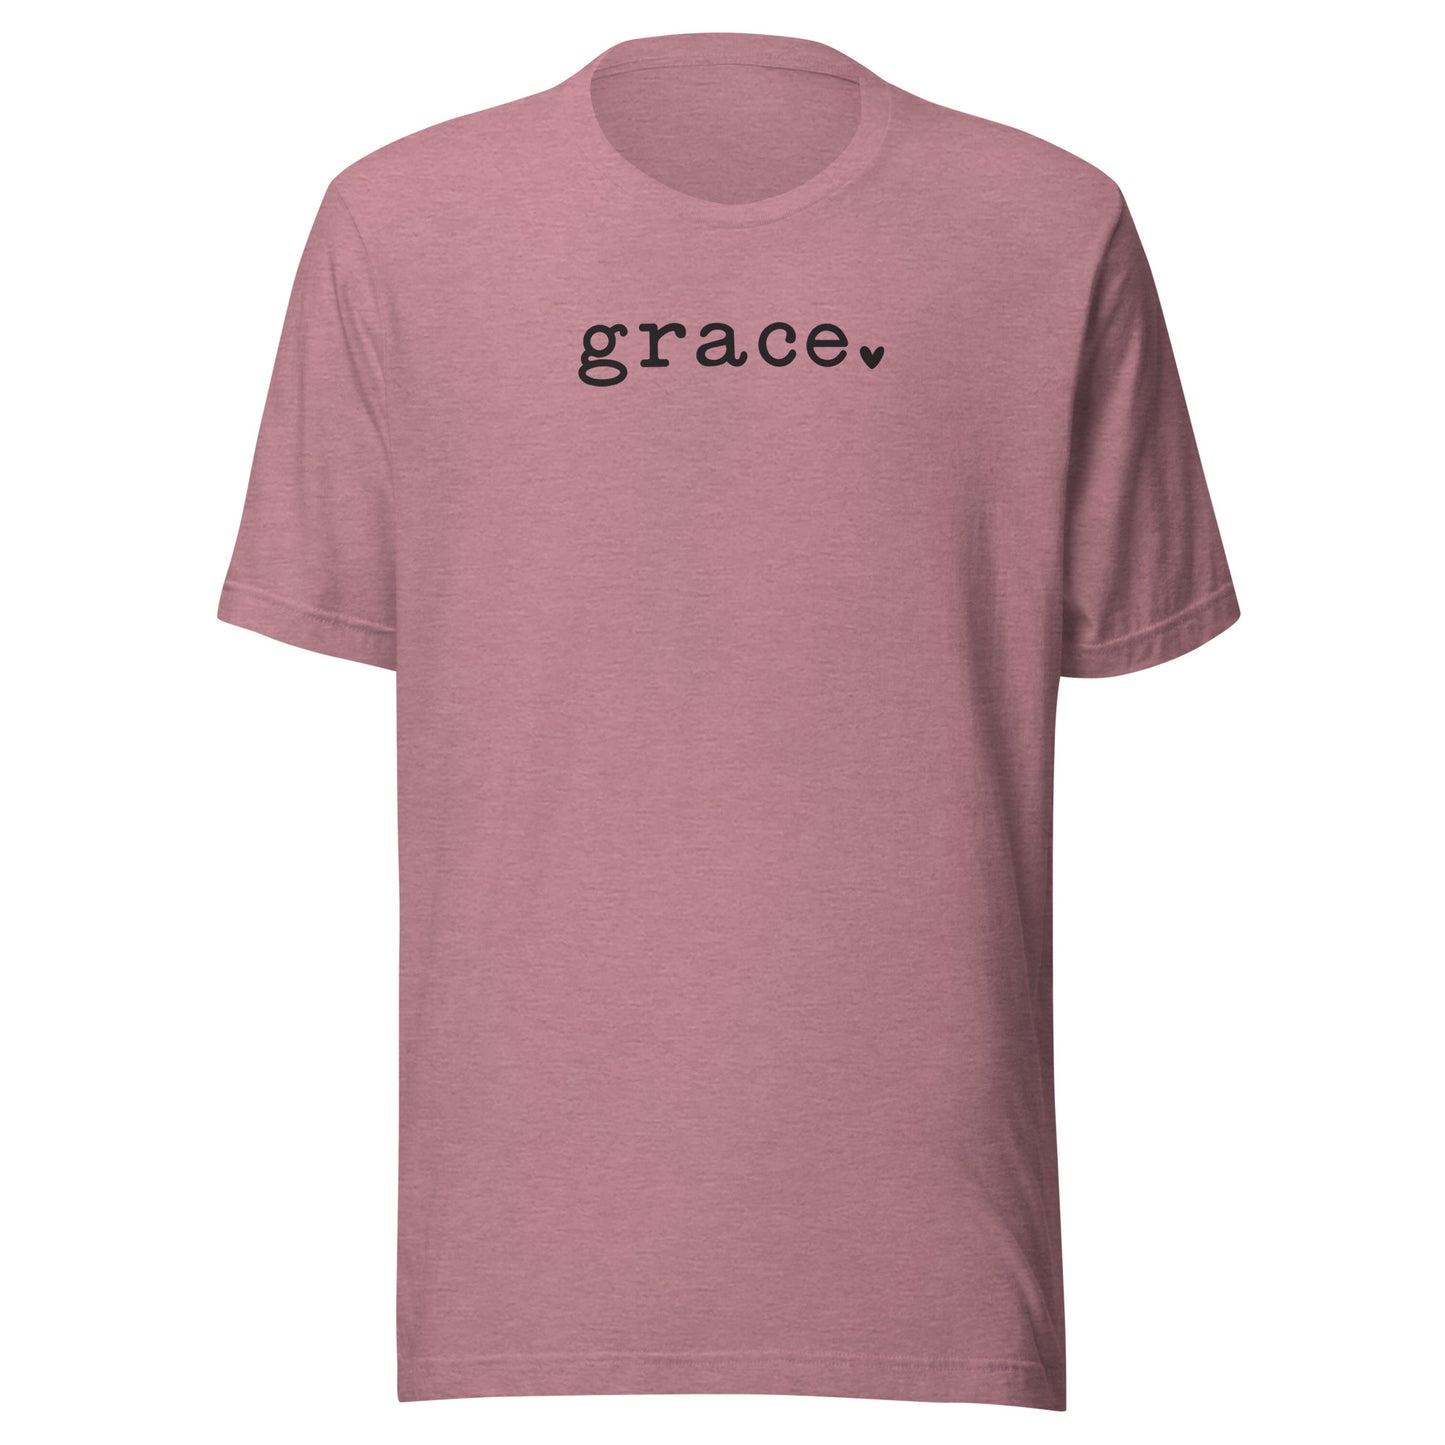 Grace T-Shirt: A Stylish Expression of Faith and Uplifting Inspiration